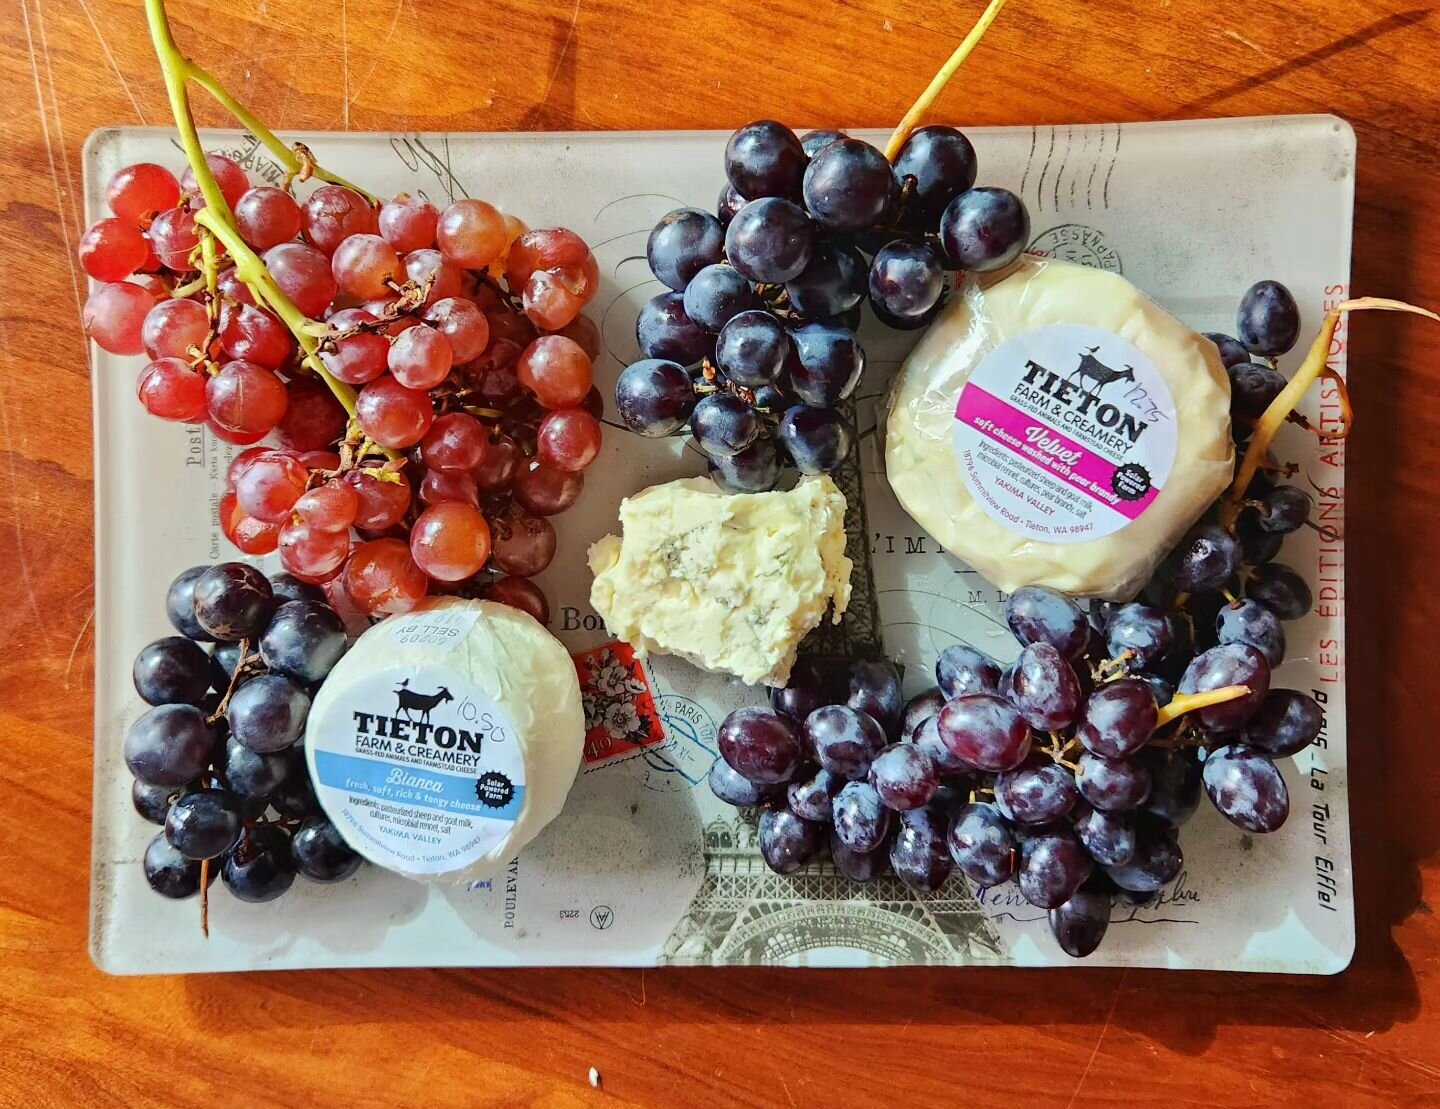 Now this is what I call perfection! Three kinfs of f grapes #canalesfarm from Manny and two great cheeses.from #tietoncreamery . Oregon blue from #roguecreamery .

#eatsustainably #eatlocal #eattherainbow #universitydistrictfarmersmarket #eattheseaso